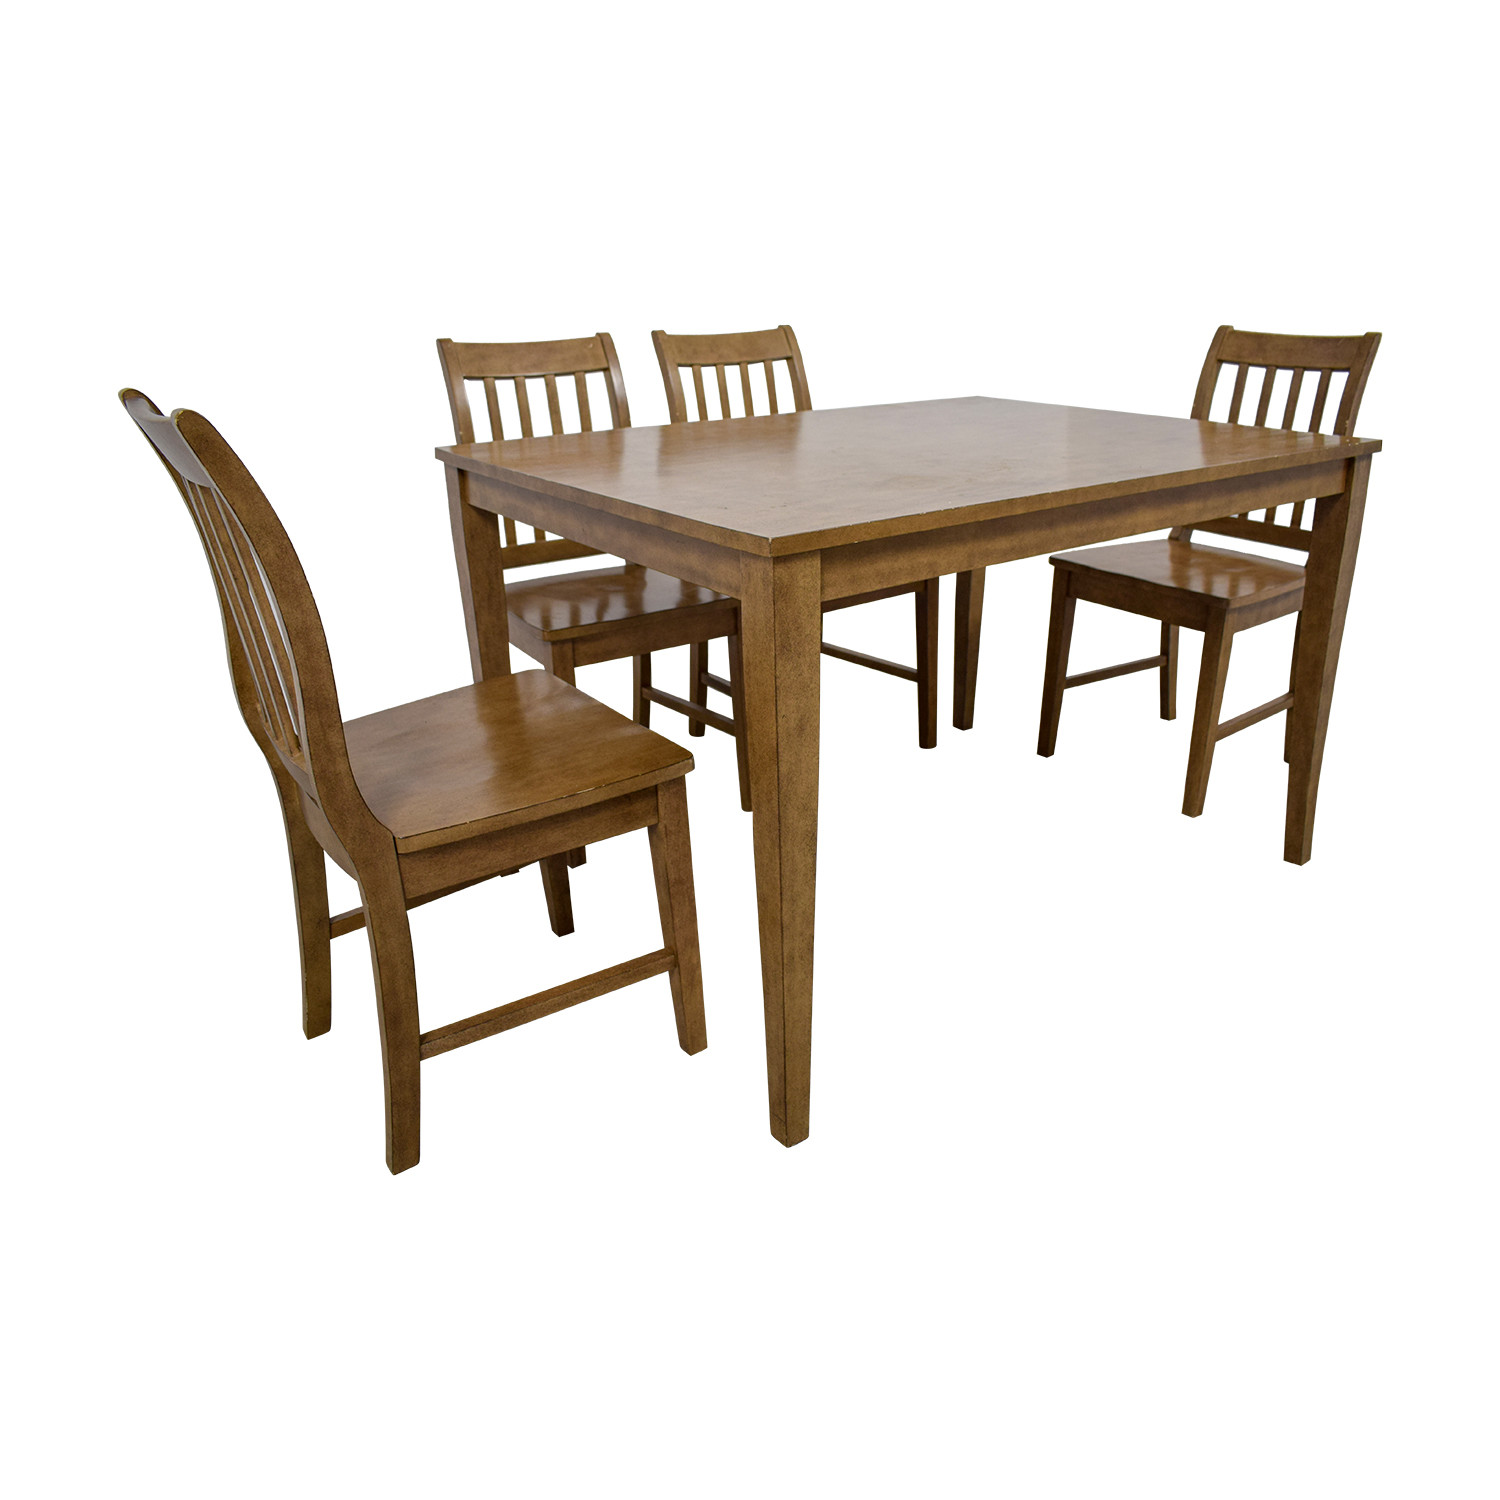 Target Small Kitchen Table
 OFF Tar Tar Brown Kitchen Table Set Tables